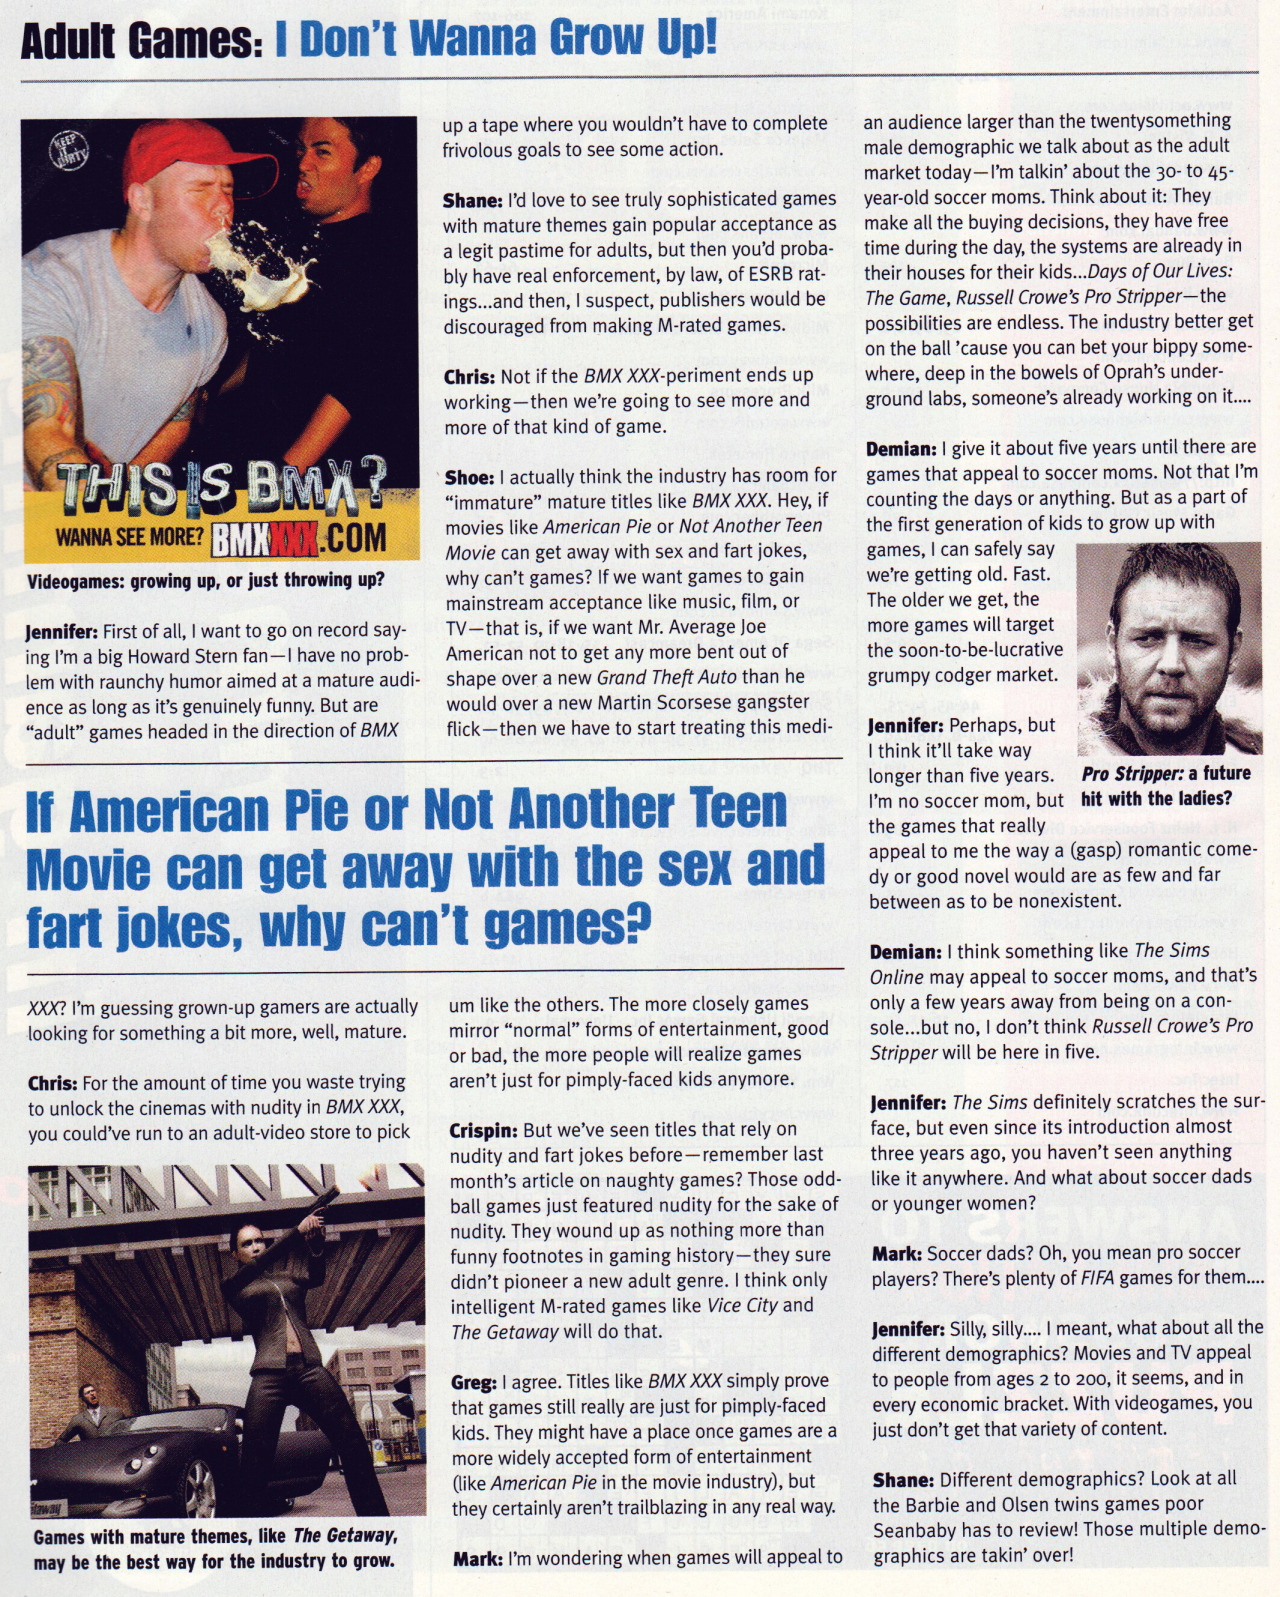 EGM #163
Adult Games: “If American Pie or Not Another Teen Movie can get away with the sex and fart jokes, why can’t games?”